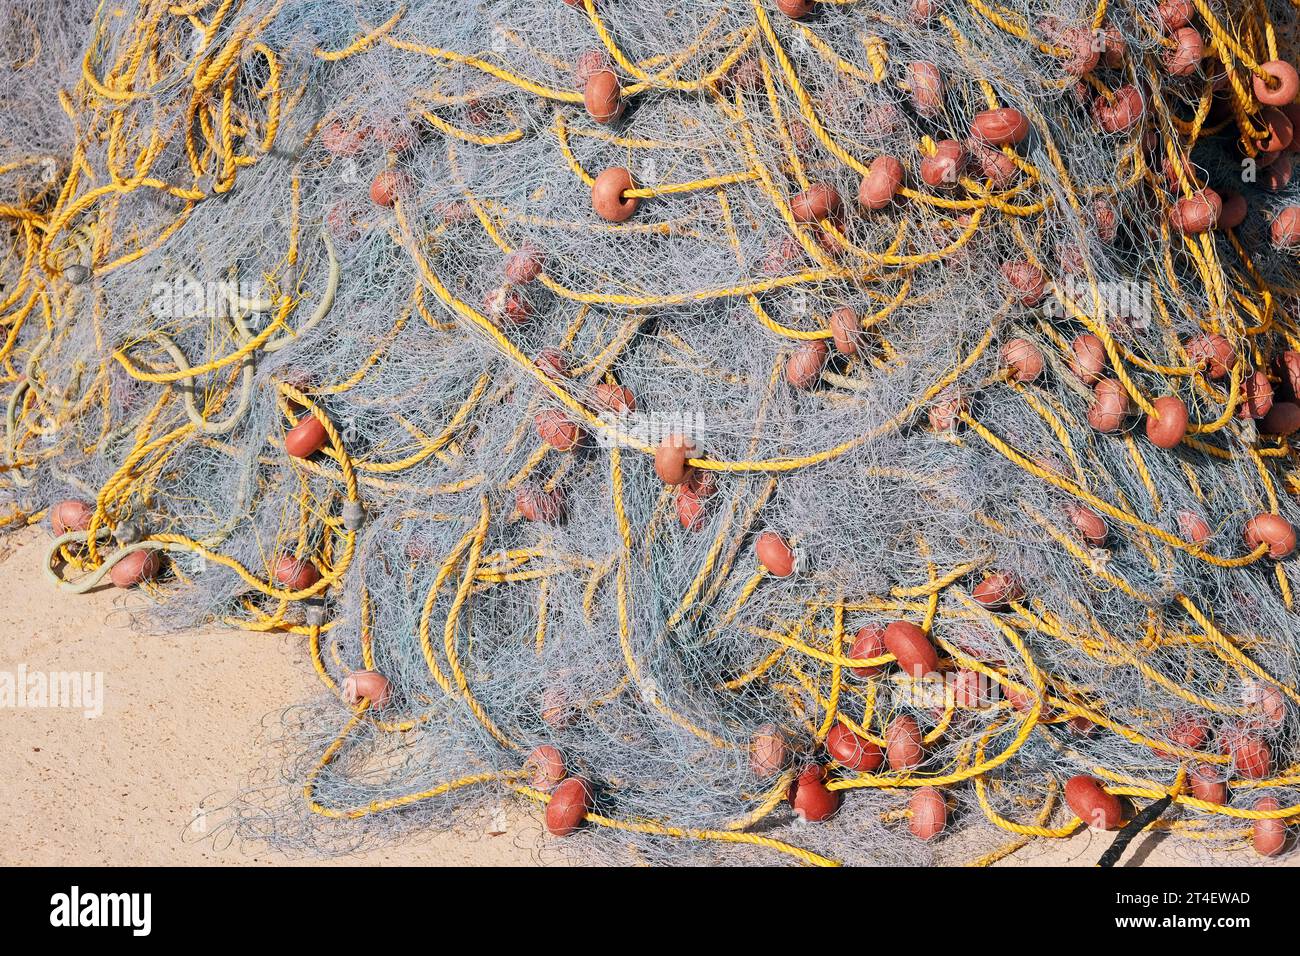 Pile of fishing net drying on the shore, closeup still lige background Stock Photo